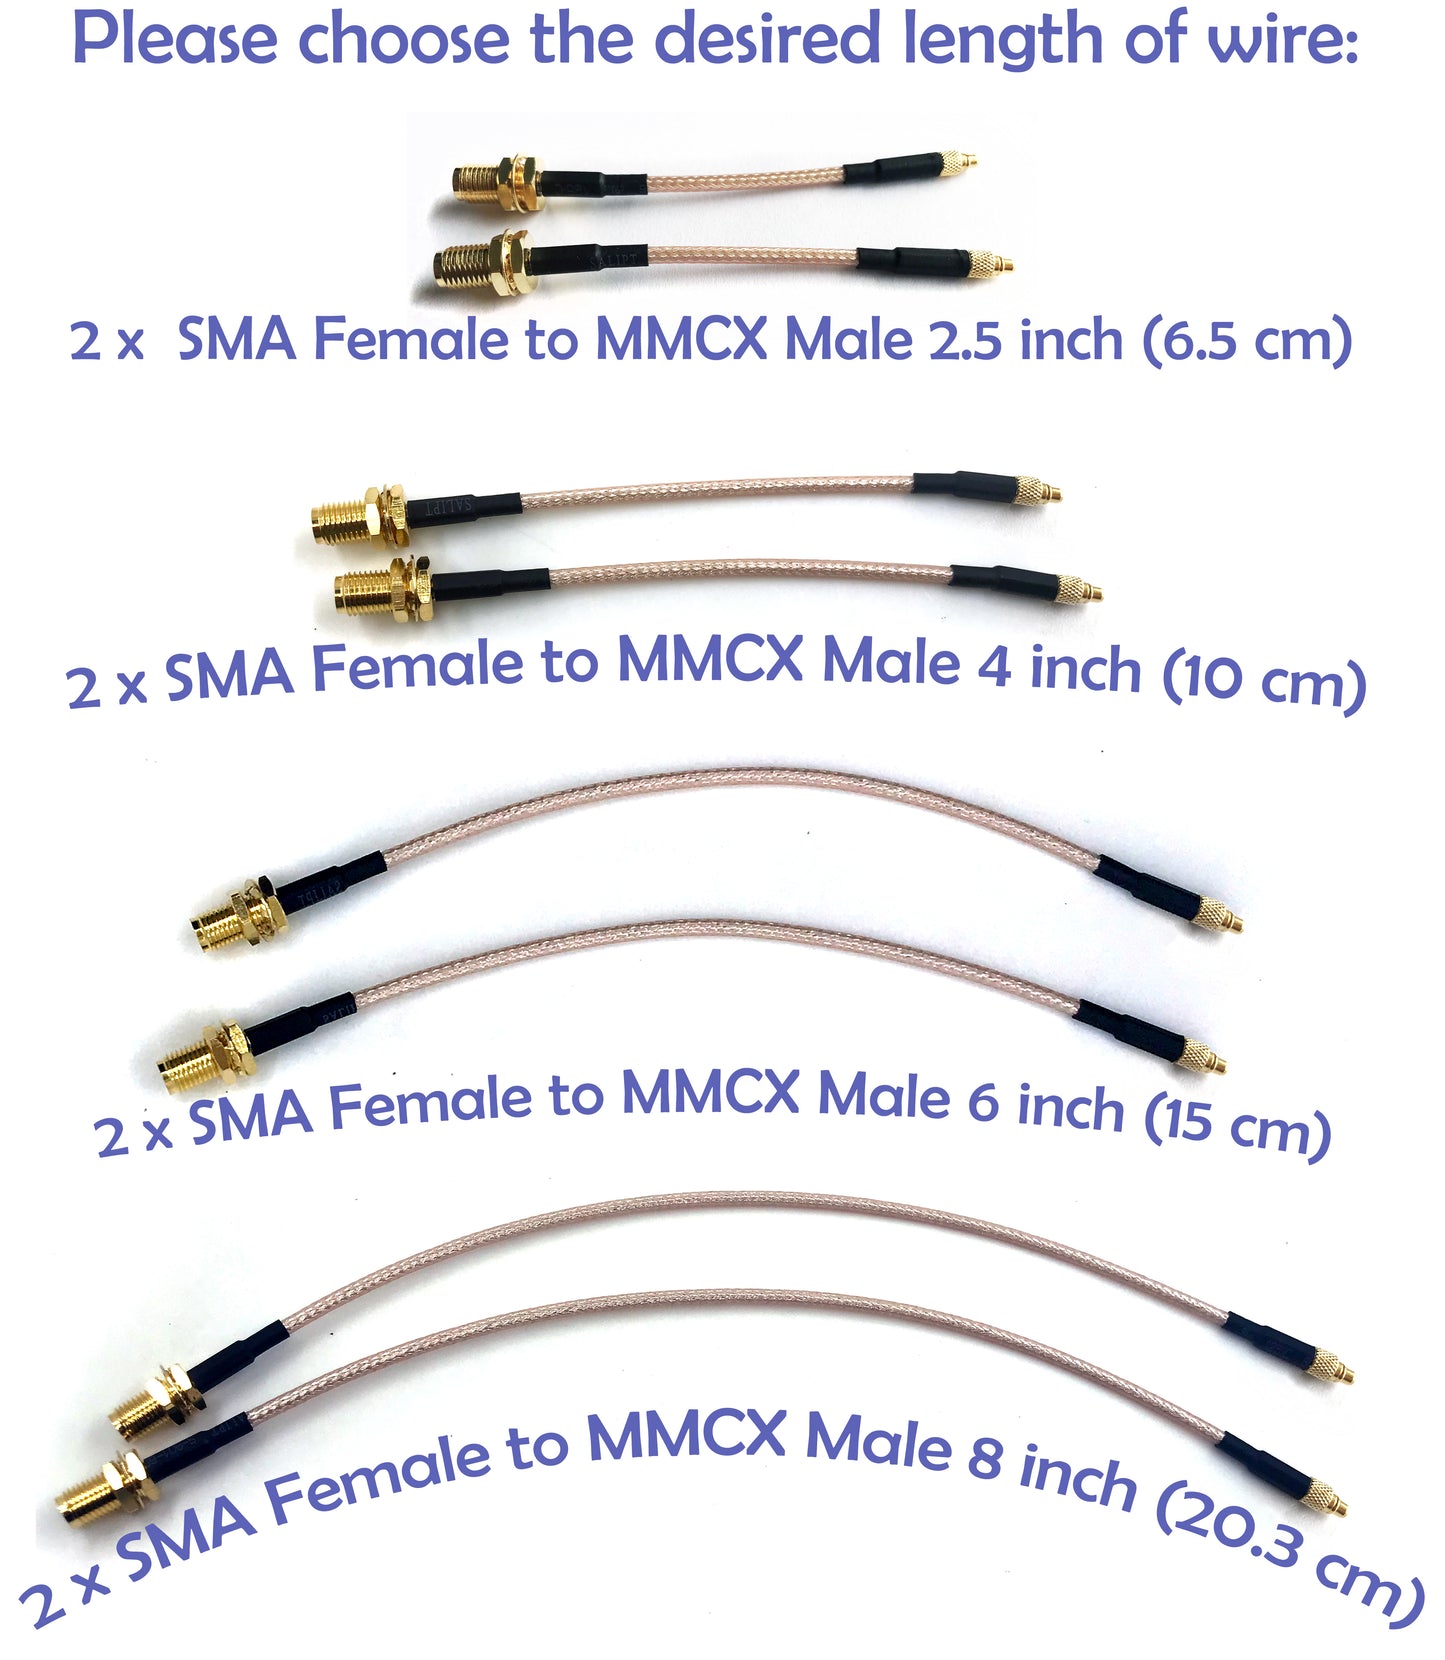 Pack of 2 RF RG316 Pigtail SMA Female Antenna Connector to Straight MMCX Male no Angle Coaxial Cable Adapter